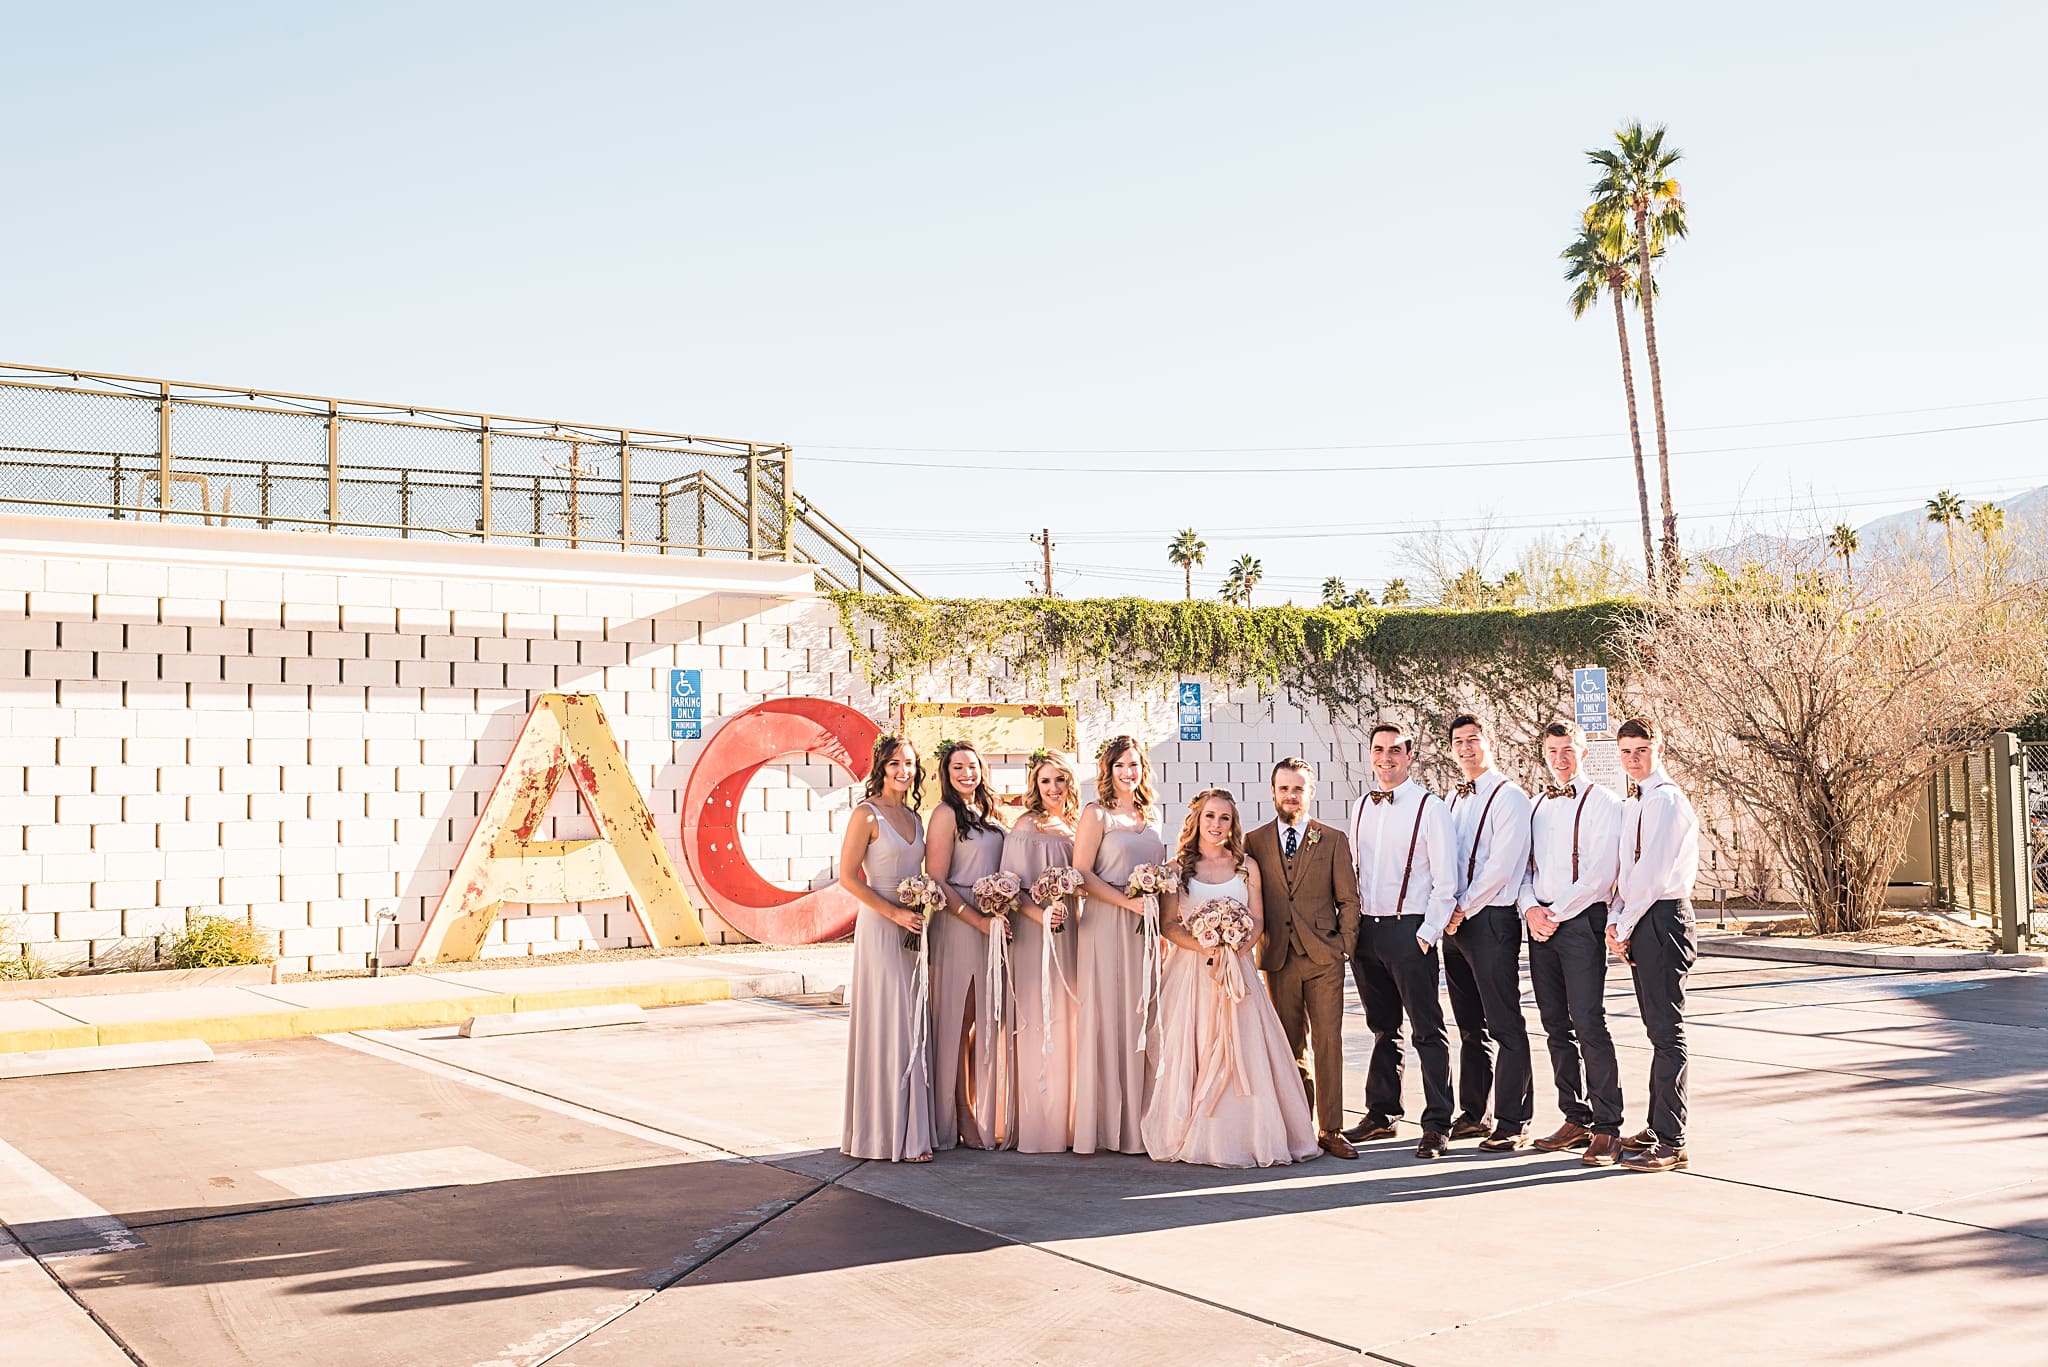 wedding party at the ace hotel sign in palm springs